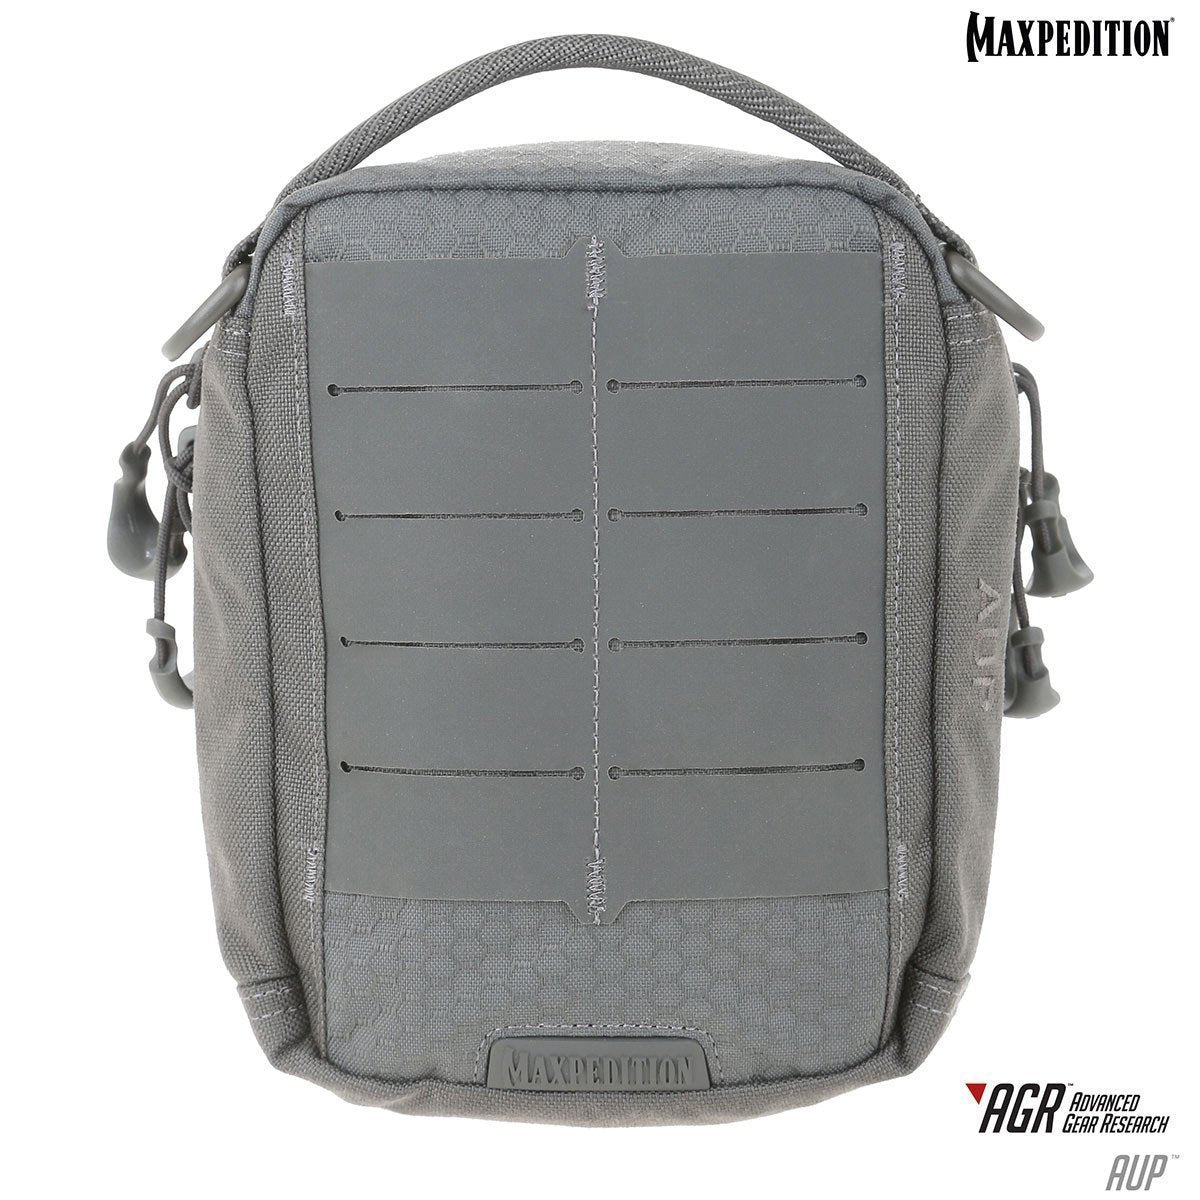 AUP™ Accordion Utility Pouch | Maxpedition  Tactical Gear